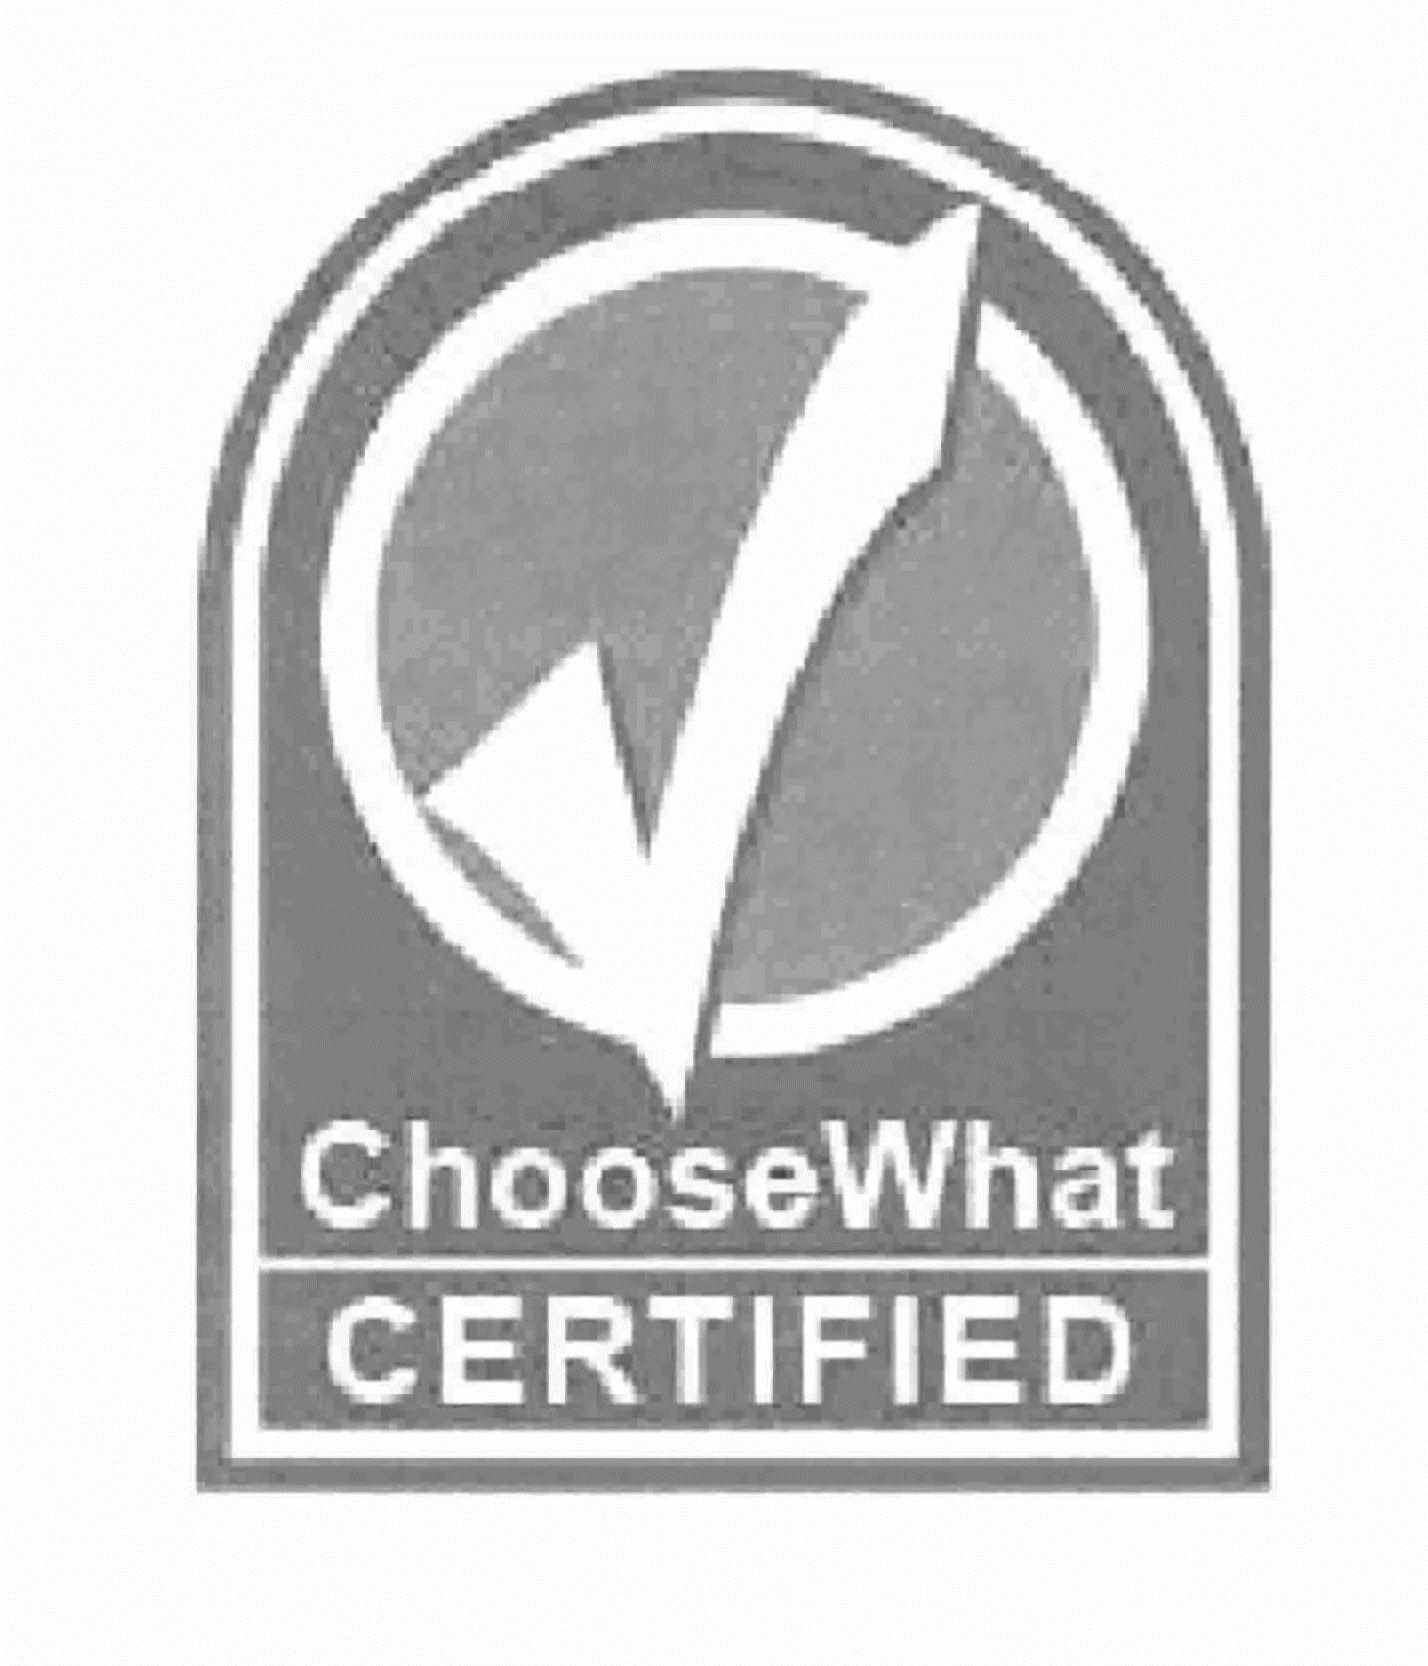  CHOOSEWHAT CERTIFIED